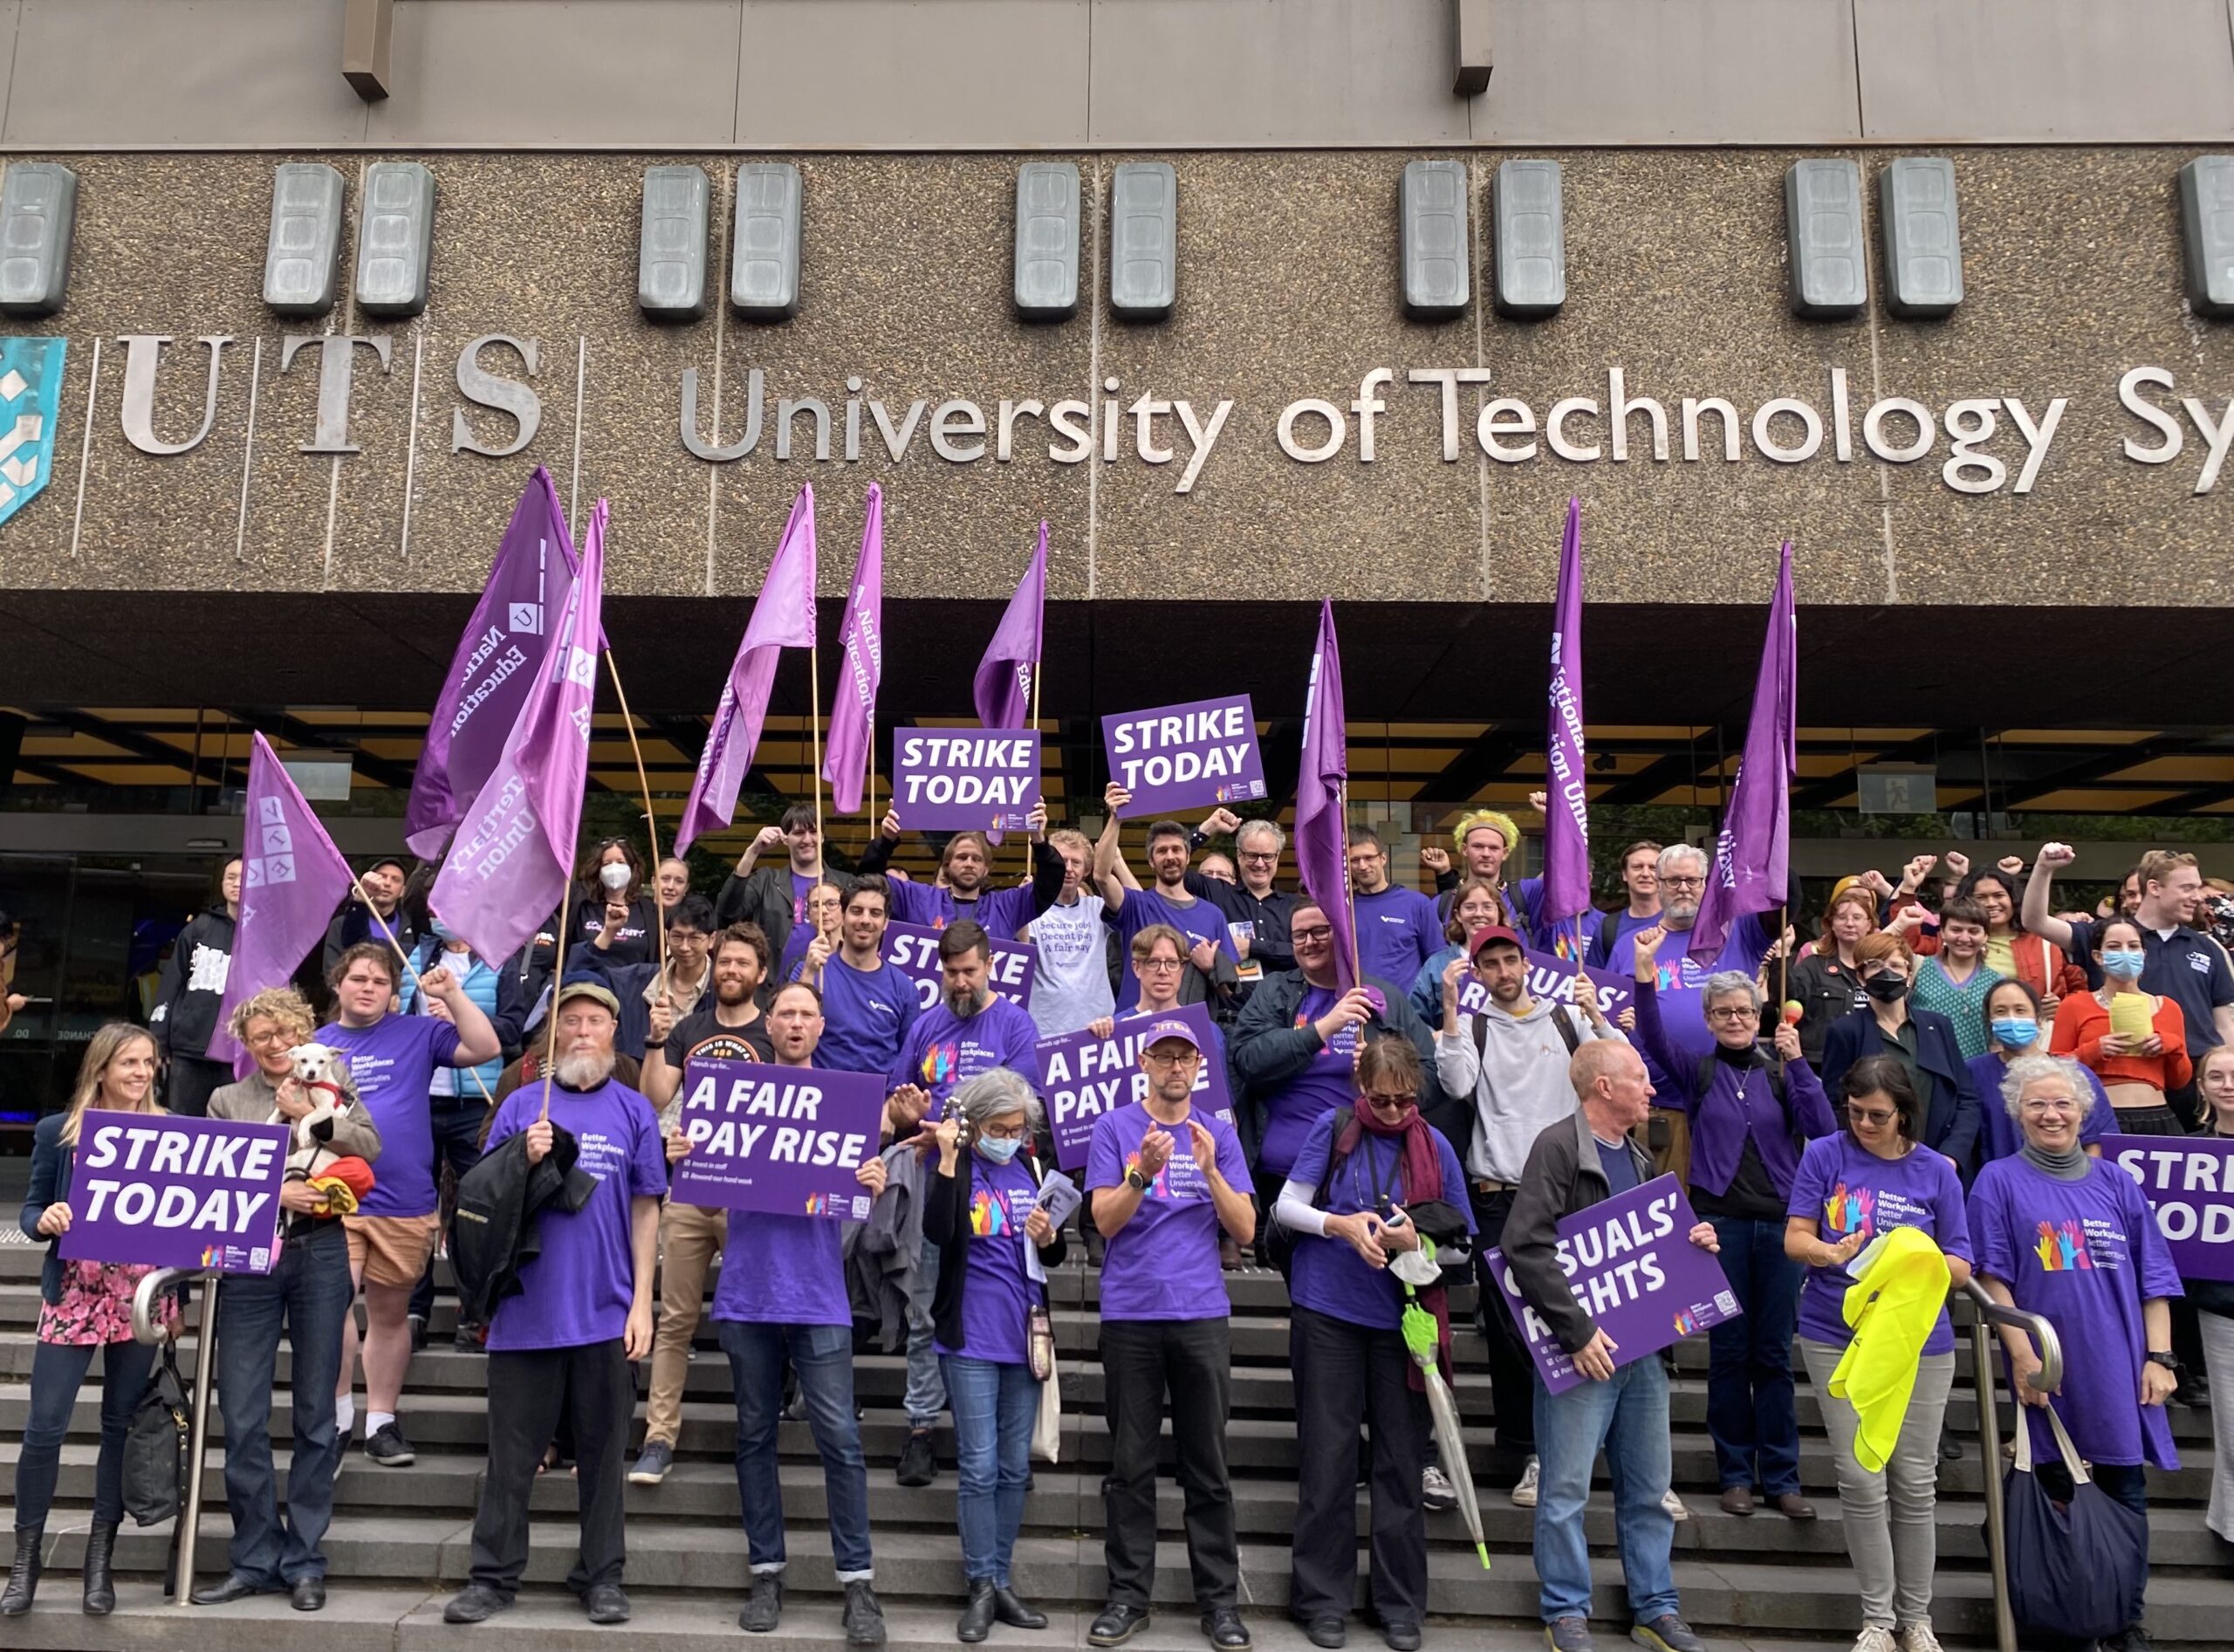 UTS staff strike for better working conditions